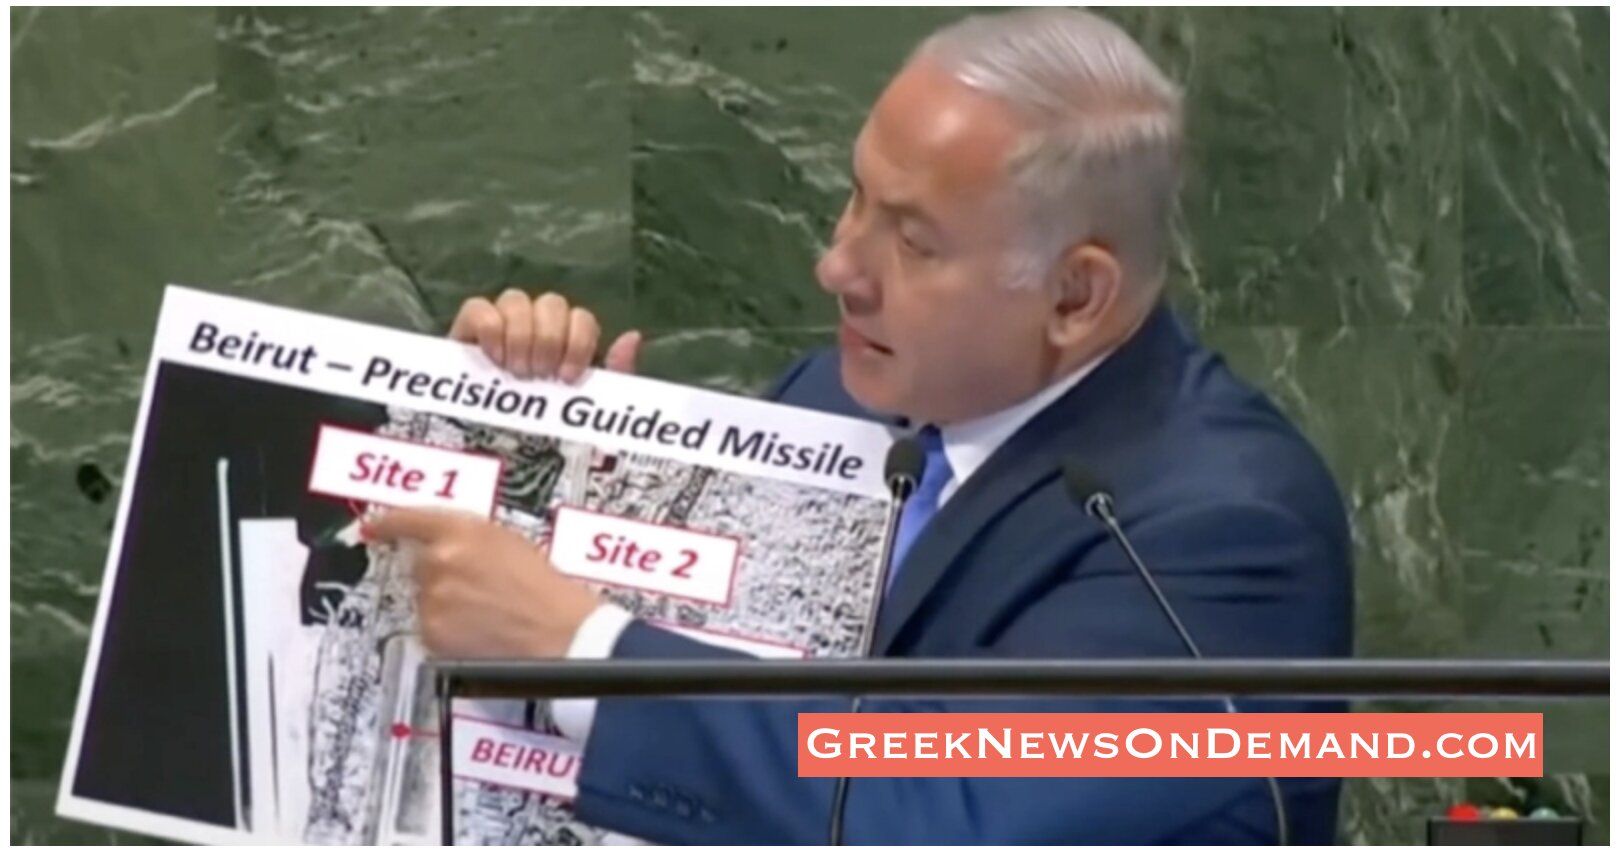 SEE IT: NETANYAHU THREATENED IN 2018 TO BOMB HEZBOLLAH MISSILE SITE IN BEIRUT WAREHOUSE